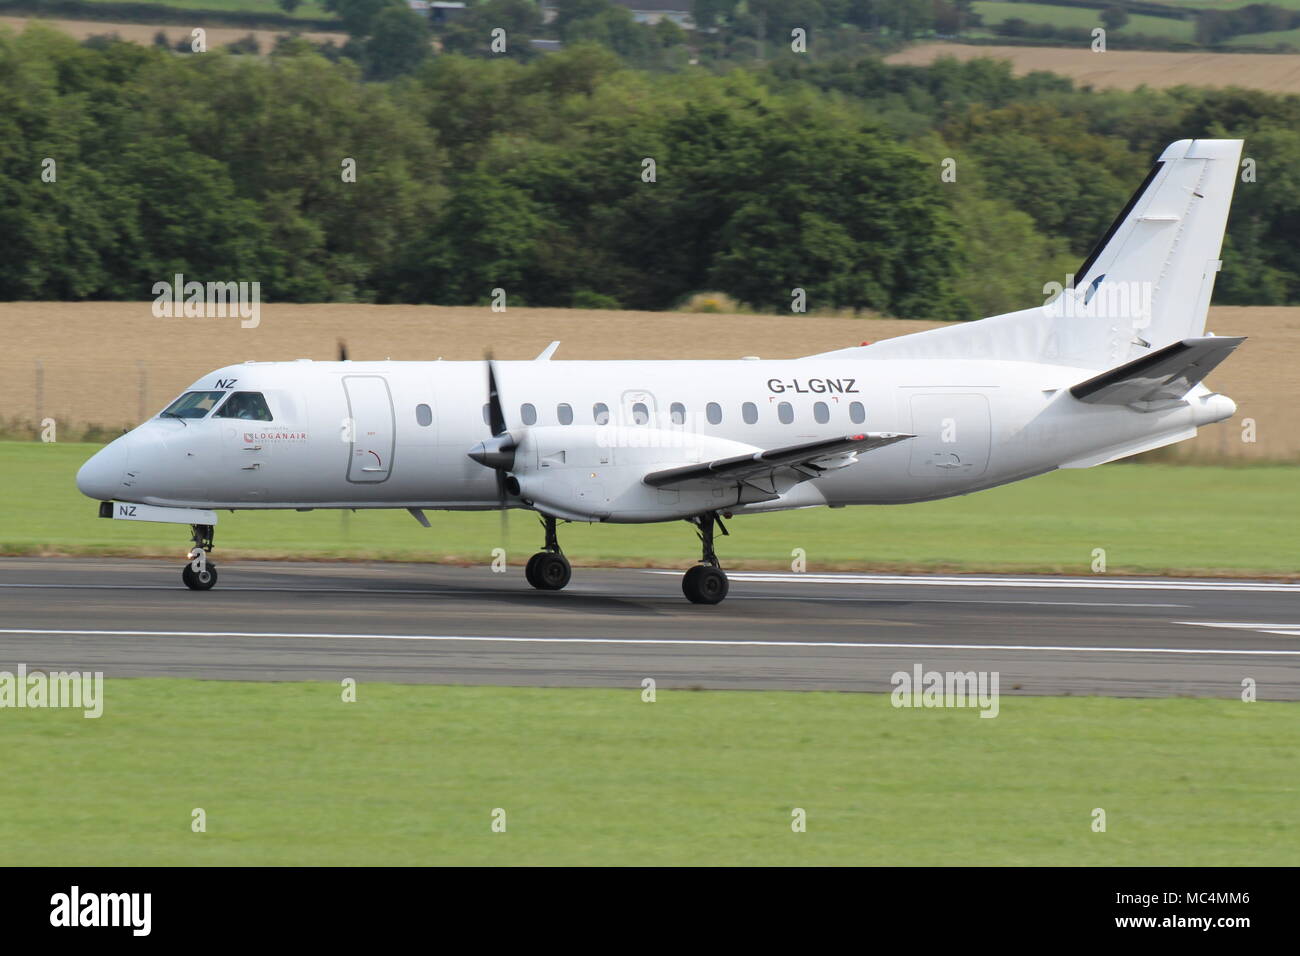 G-LGNZ, a Saab 340 operated by Loganair, at Pretswick International Airport in Ayrshire, Scotland. Stock Photo